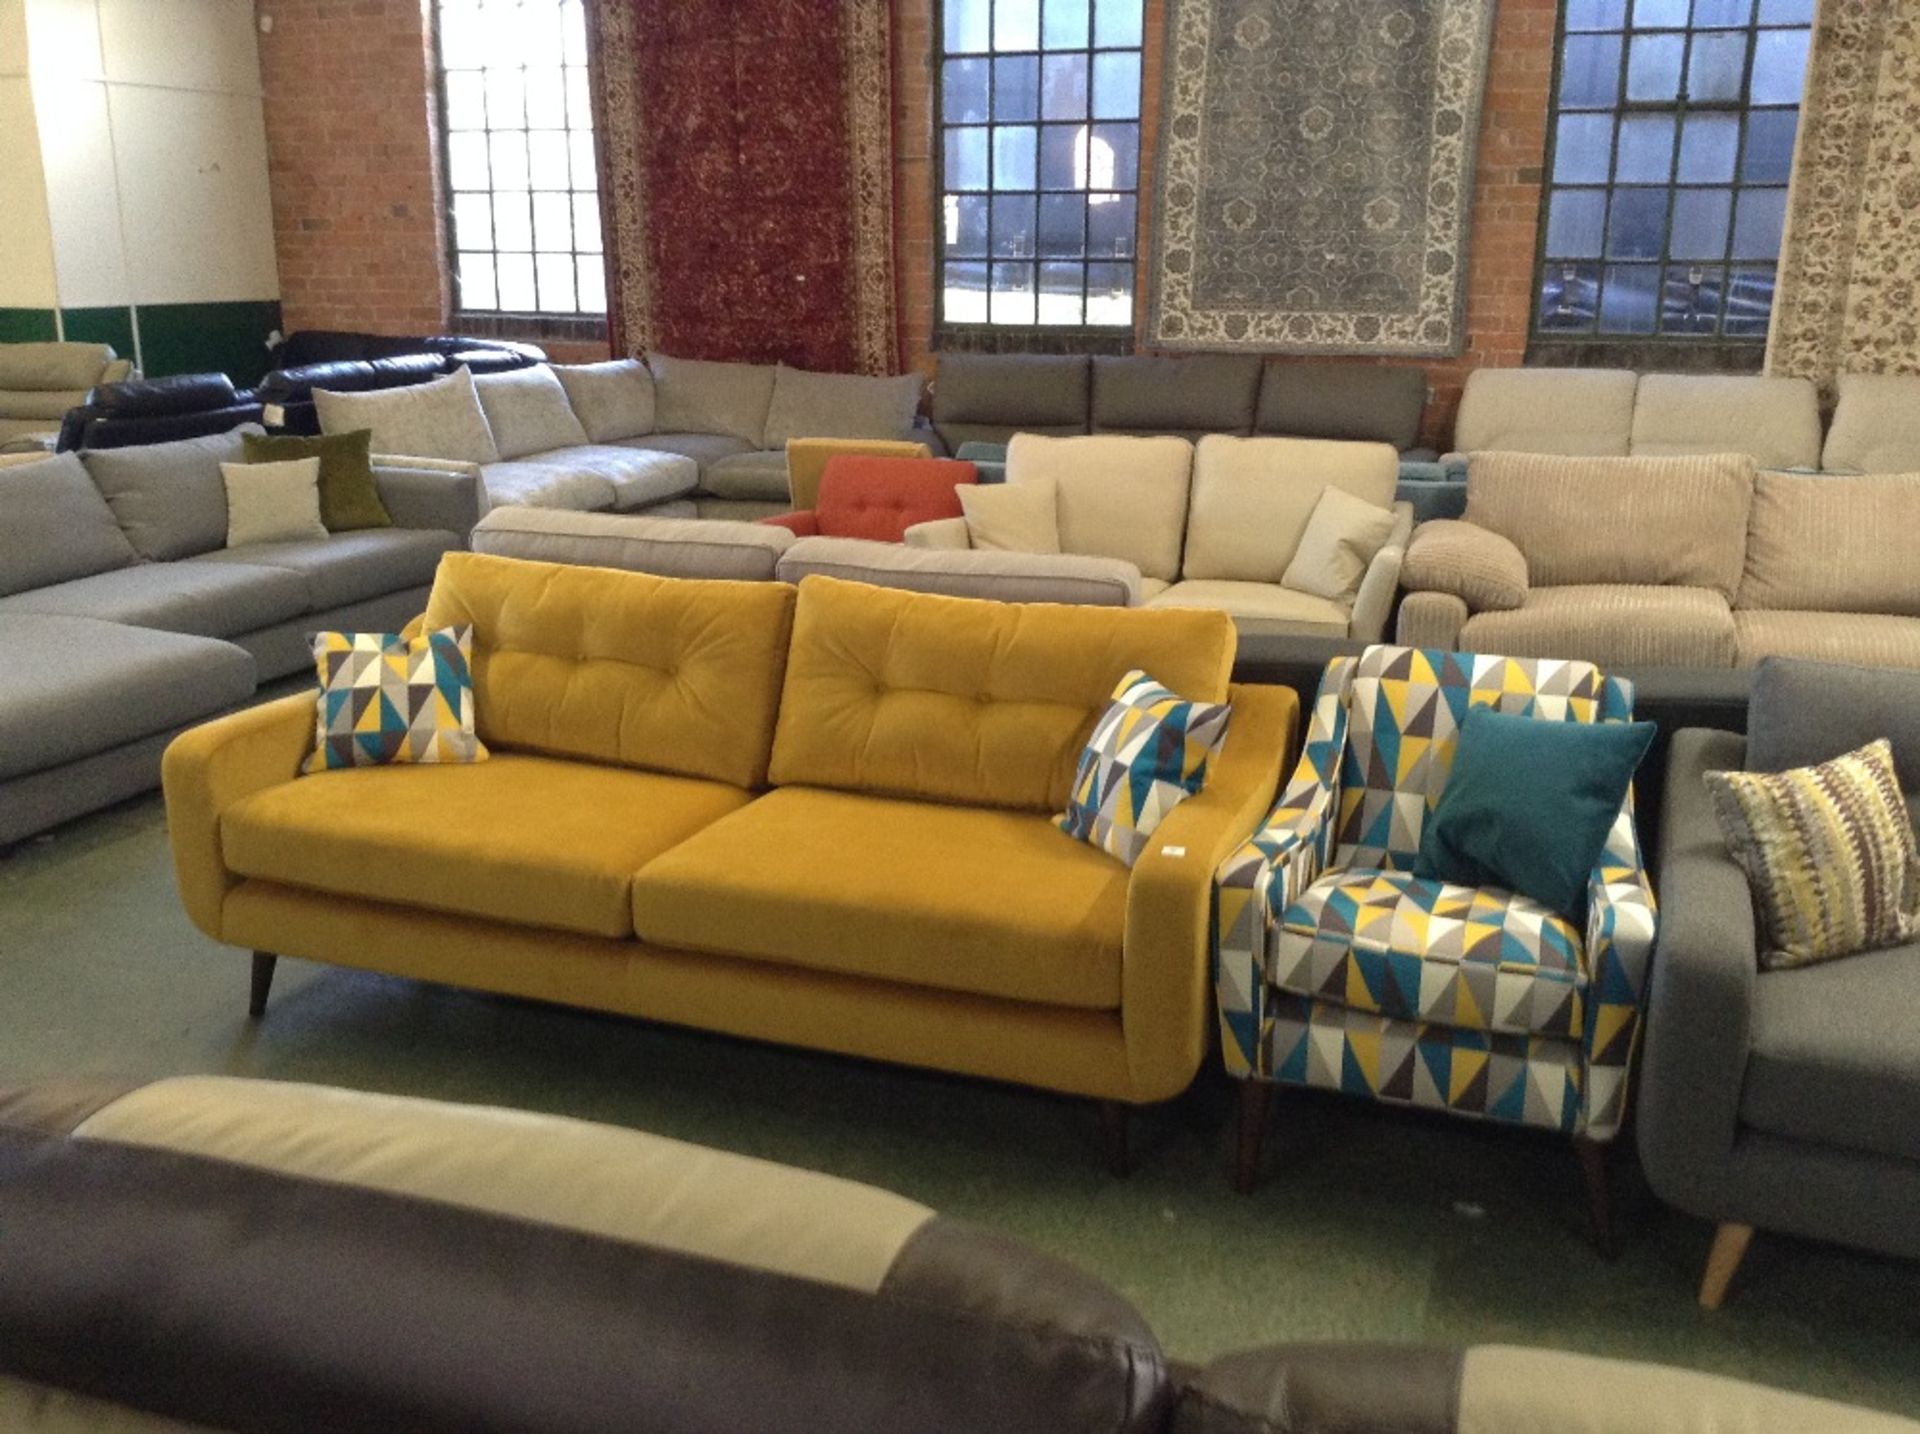 YELLOW 3 SEATER SOFA AND MULTI-COLOURED PATTERNED